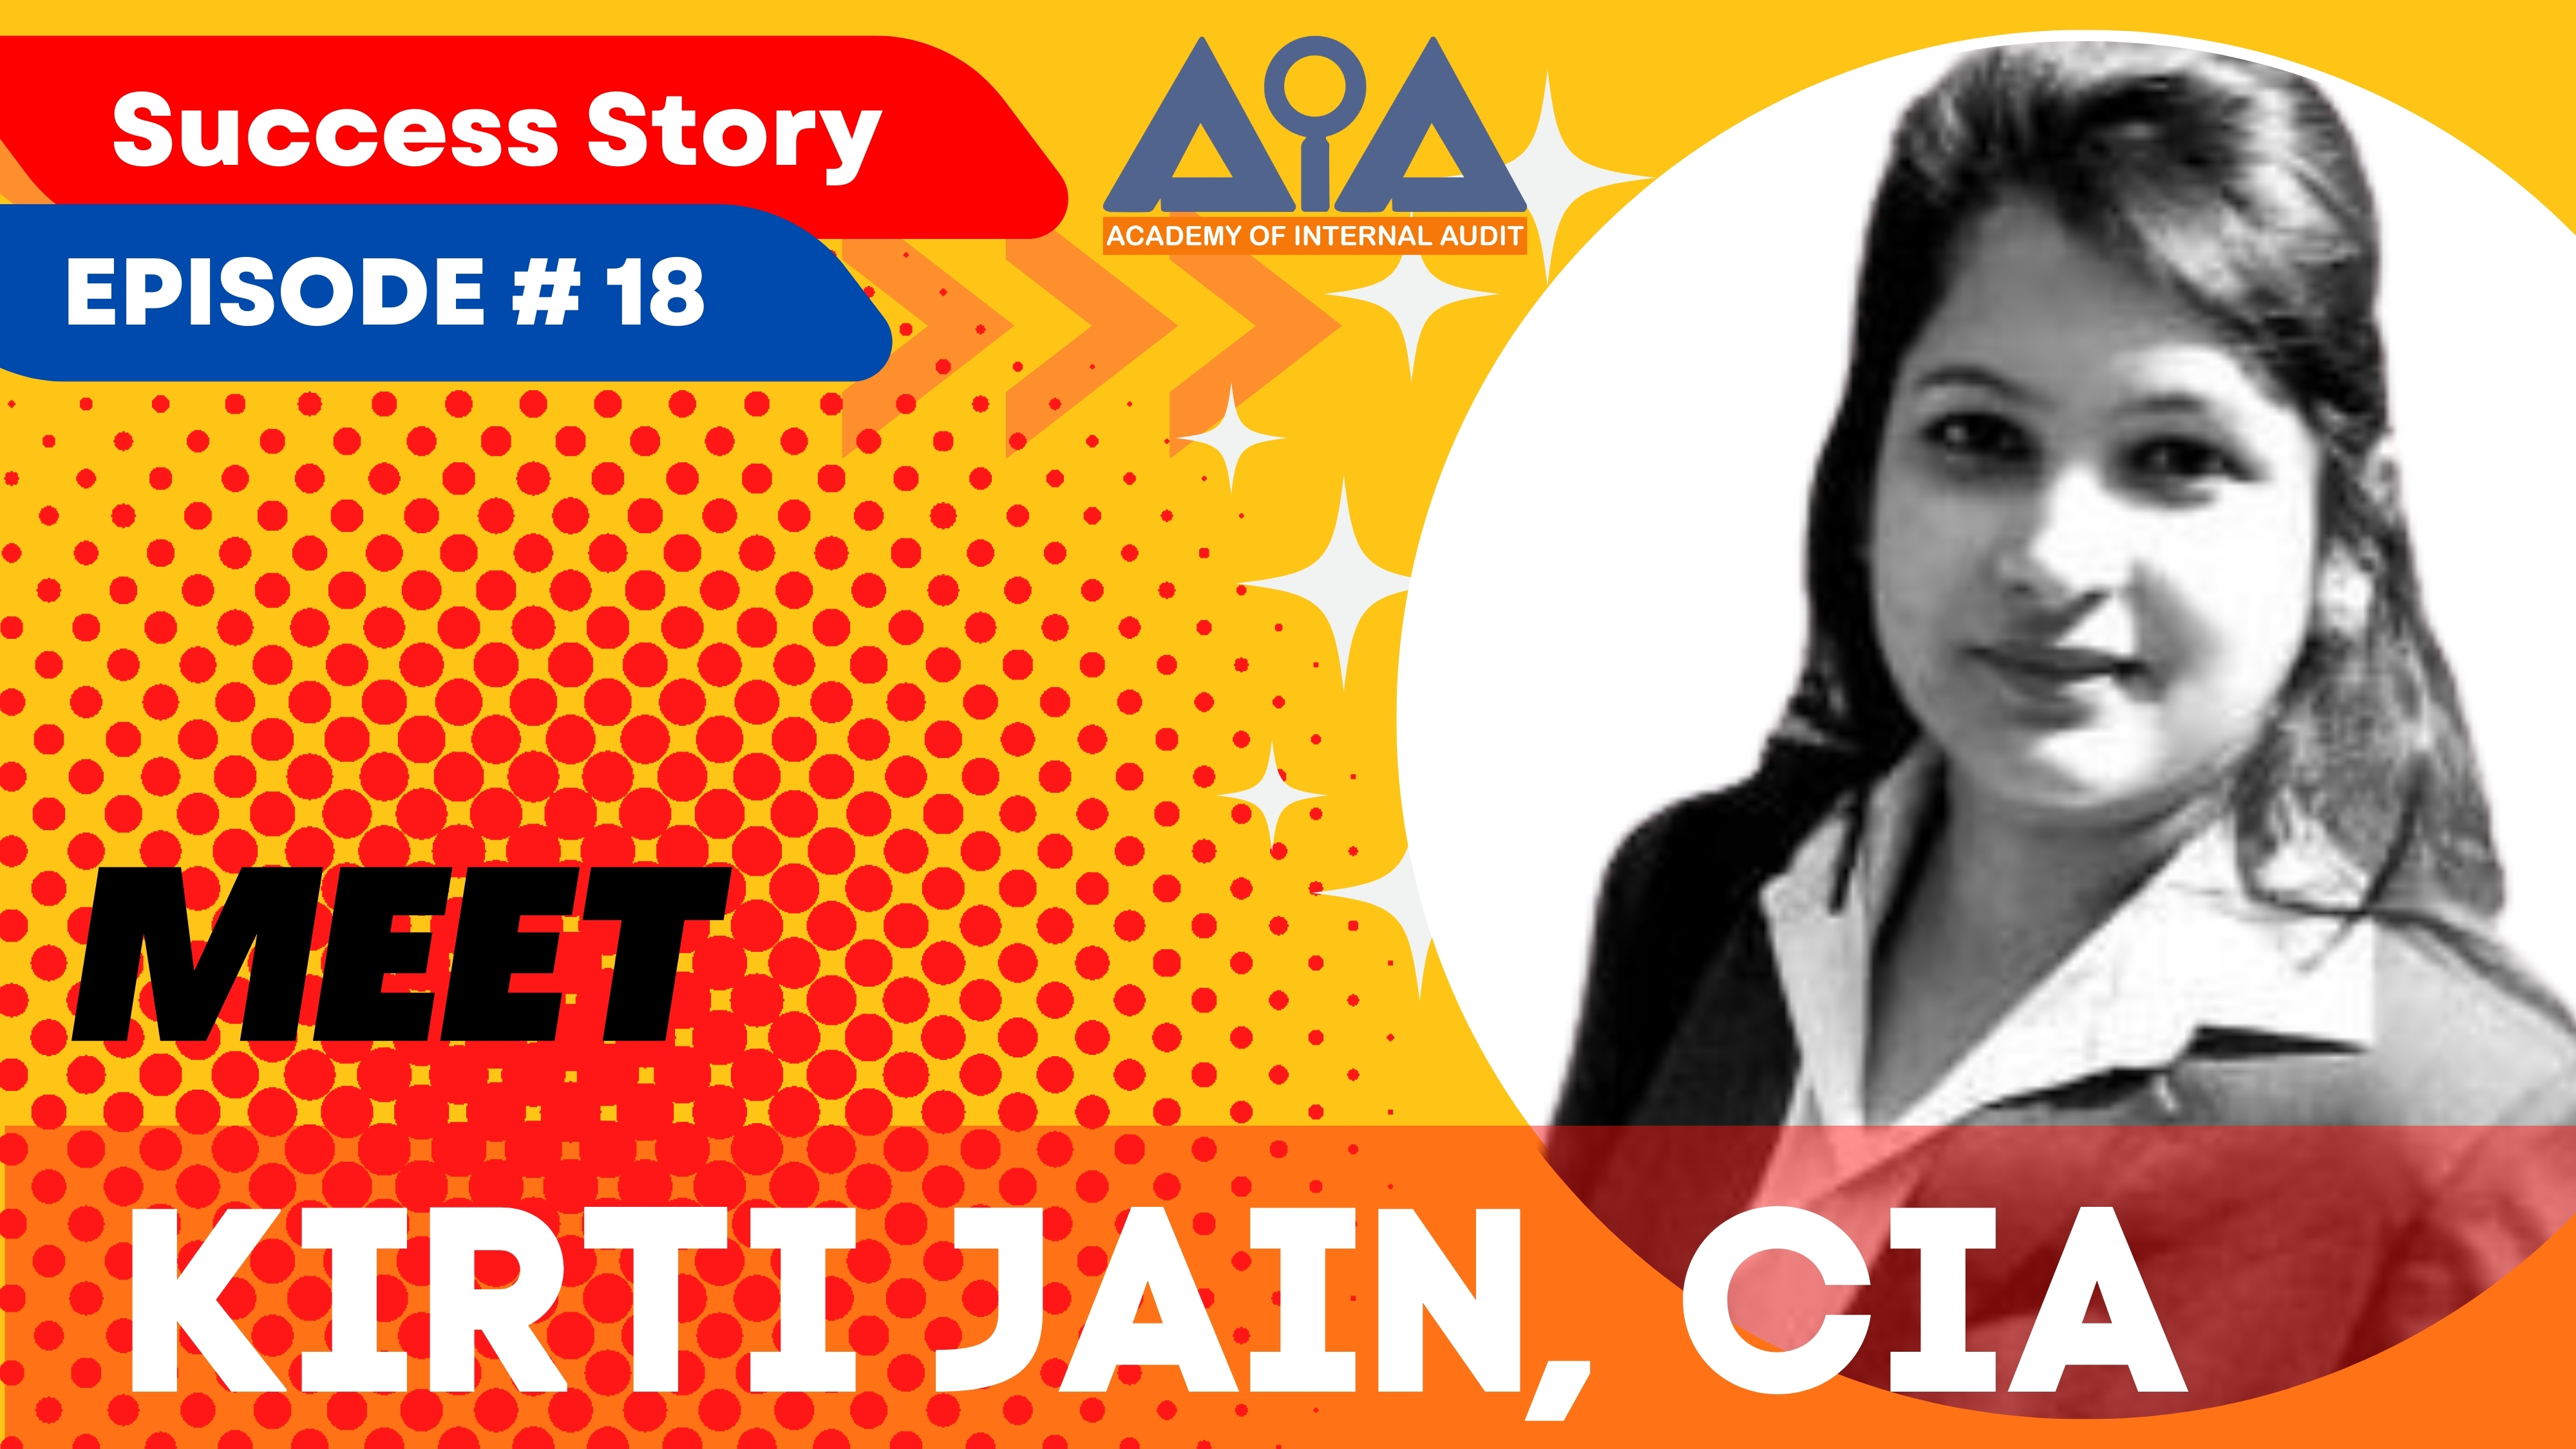 Success Story of Kirti Ep18 - AIA